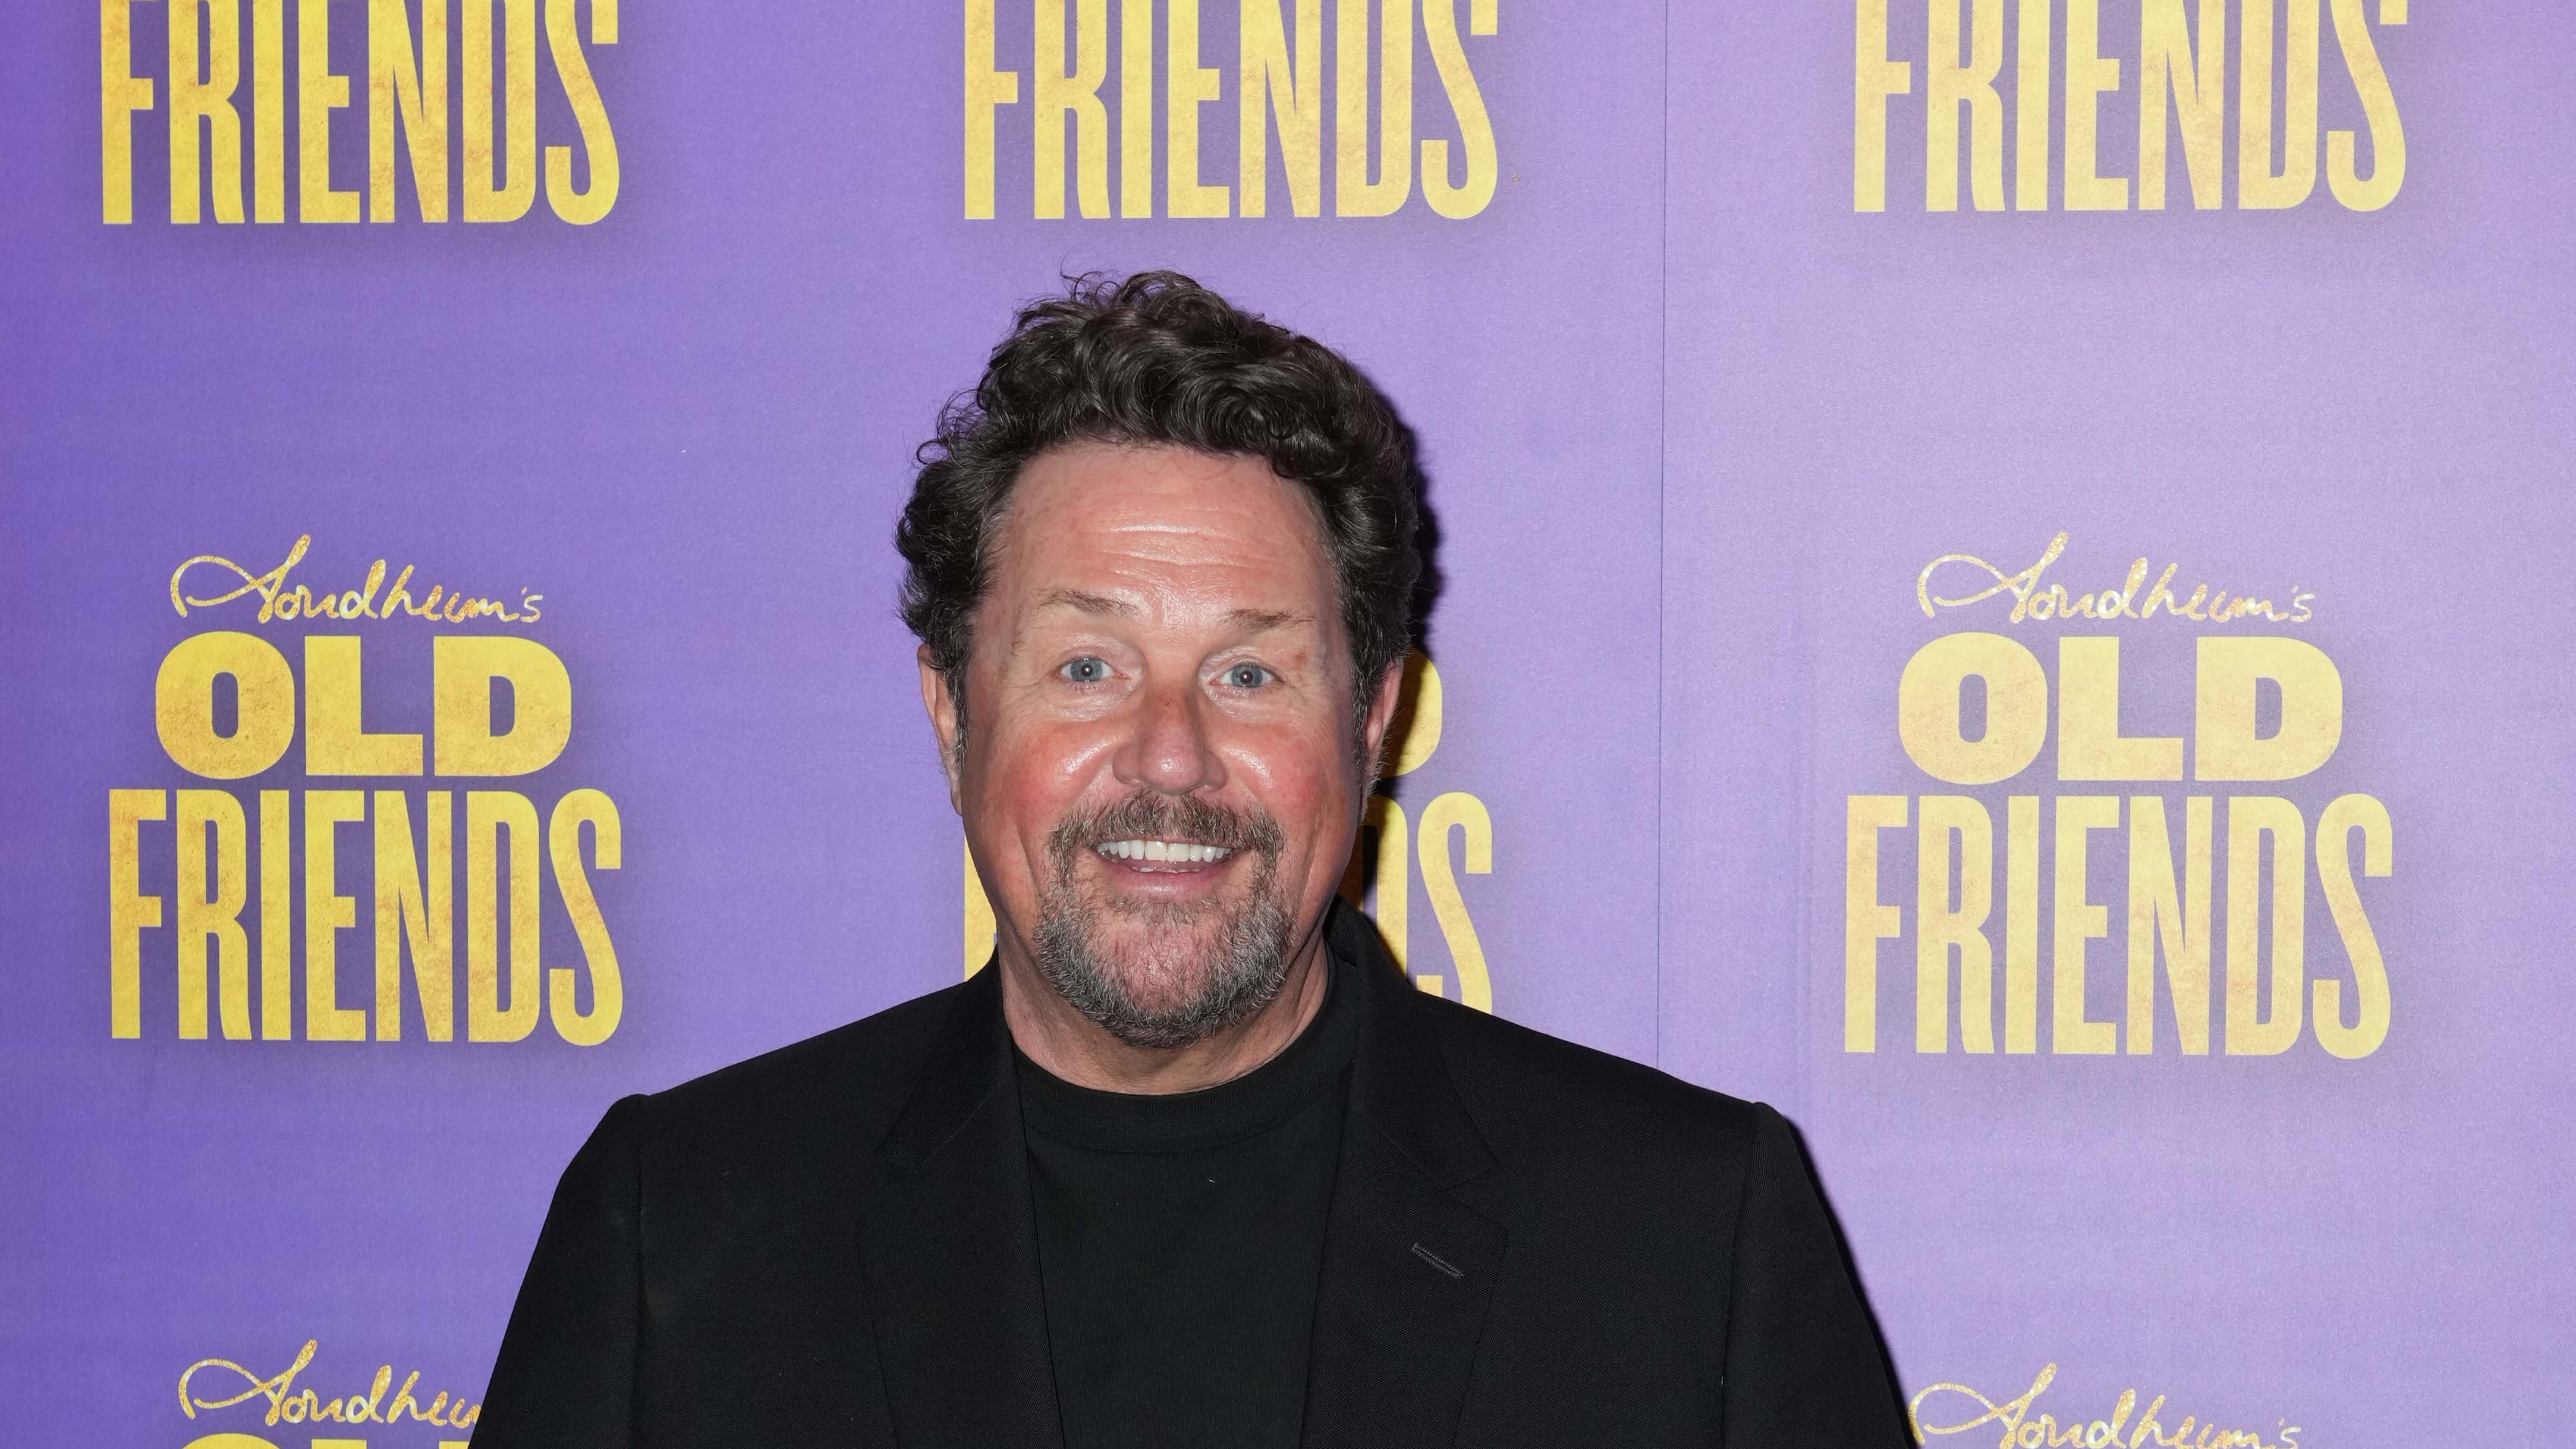 Love Songs with Michael Ball starts on June 2